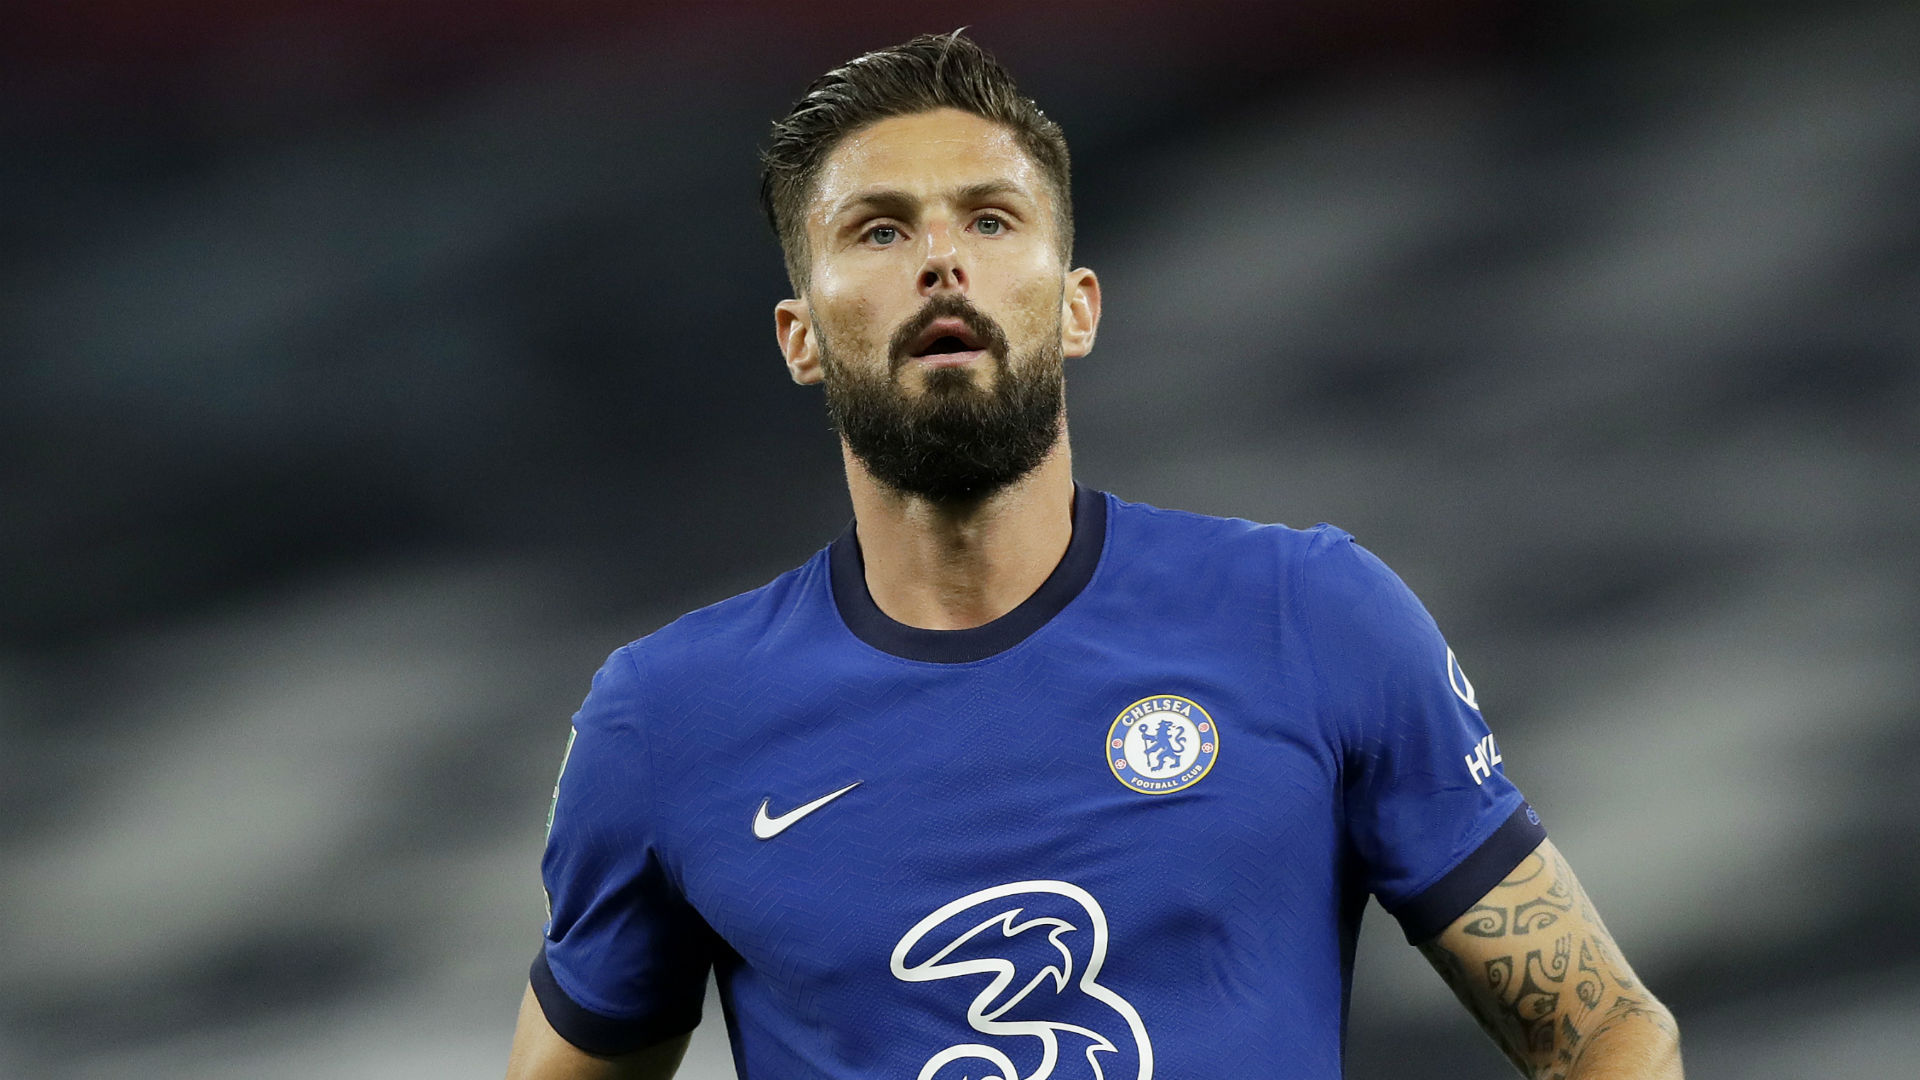 Giroud to make Chelsea future call in January but is prepared to ‘fight’ for now